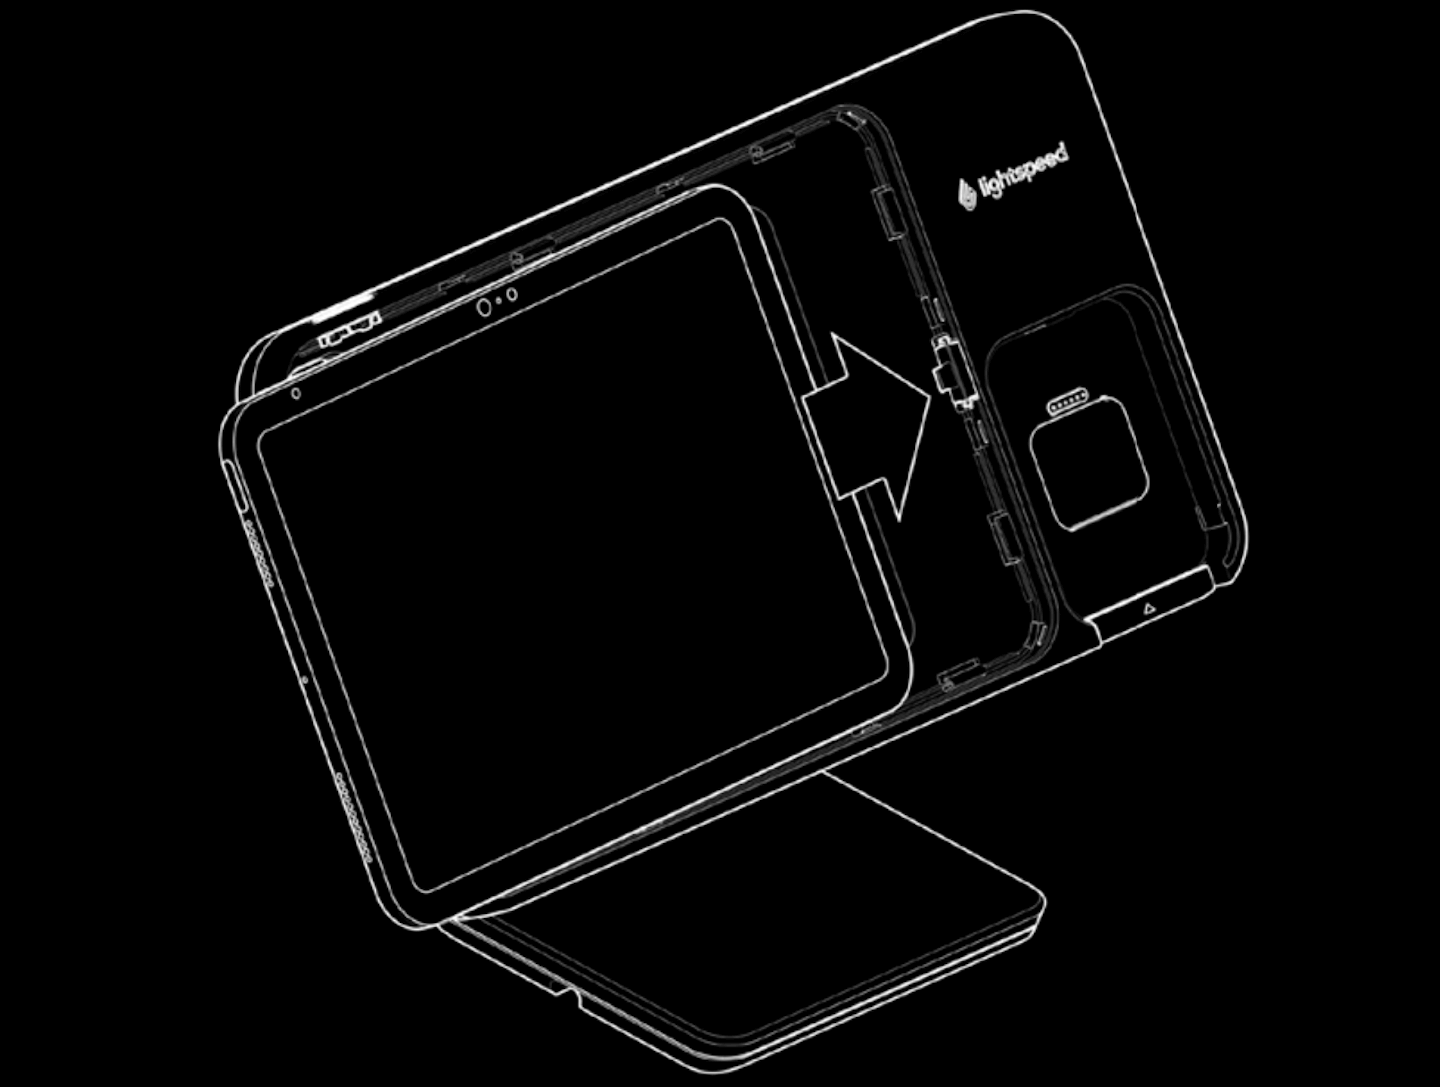 Illustration of Lightspeed Stand with Payments with iPad being placed. An arrow is pointing to show the iPad being slid into the stand towards the right.